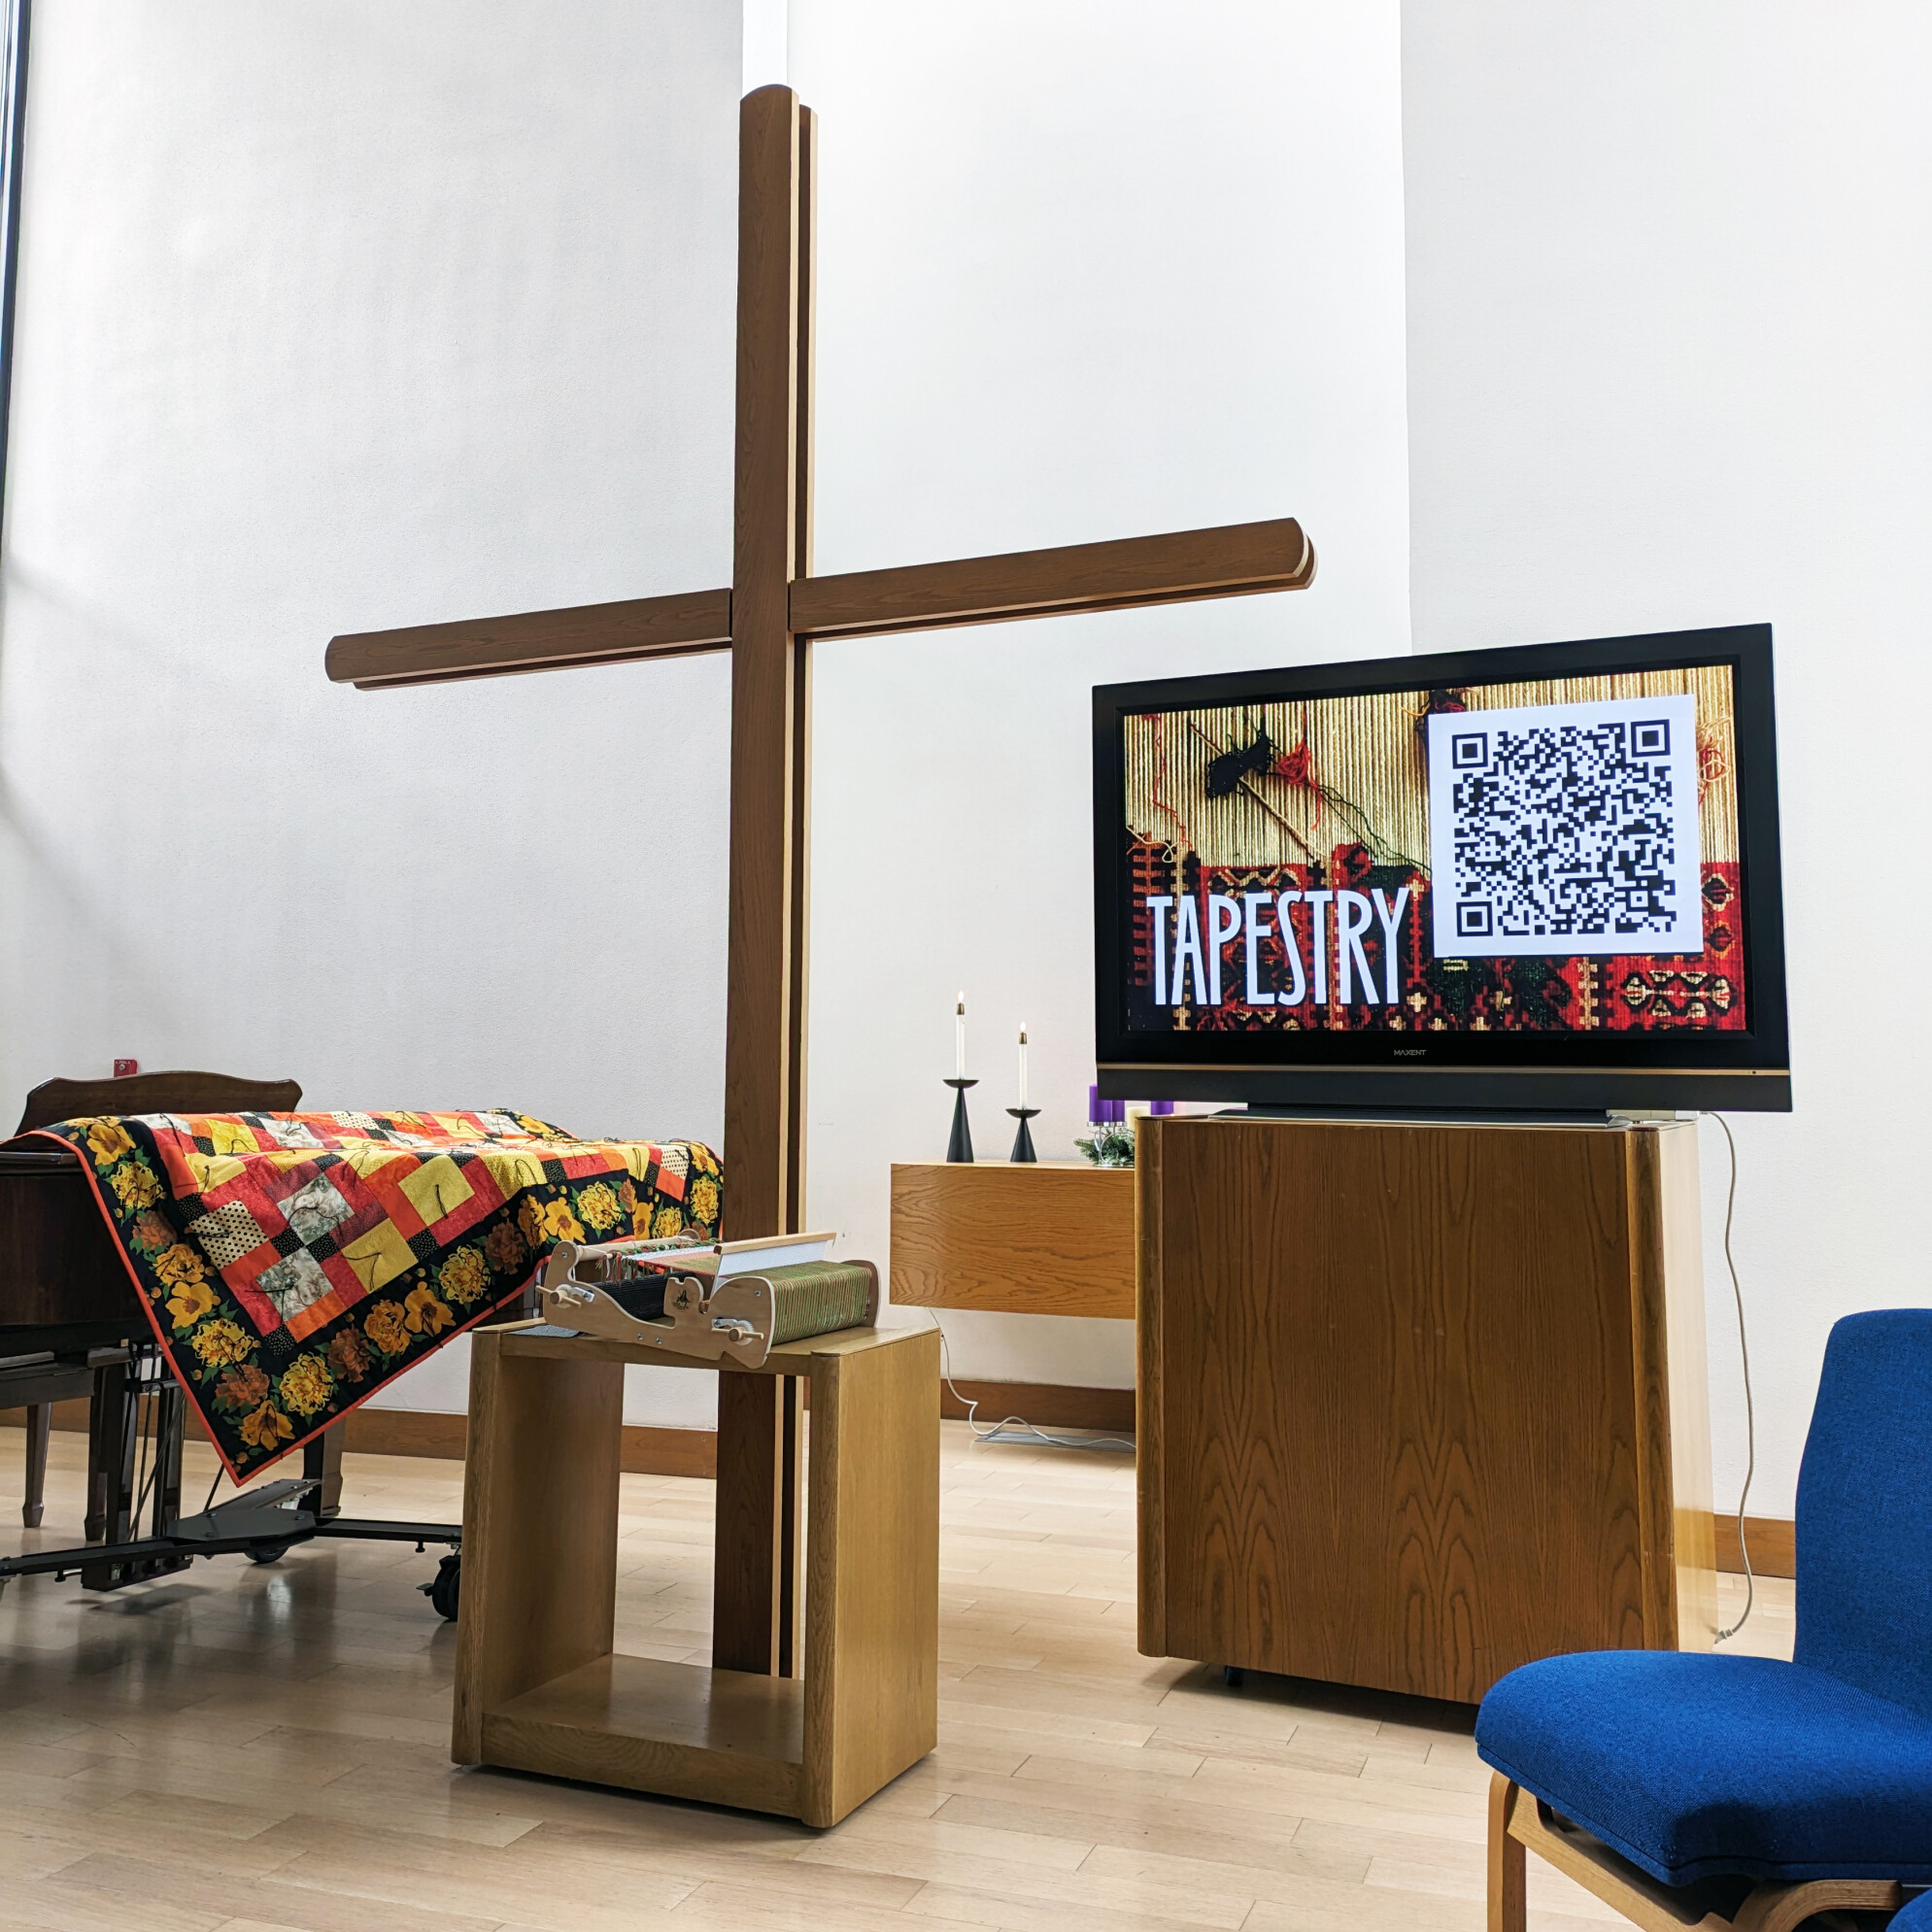 Trotter Chapel set up for Tapestry contemporary worship service